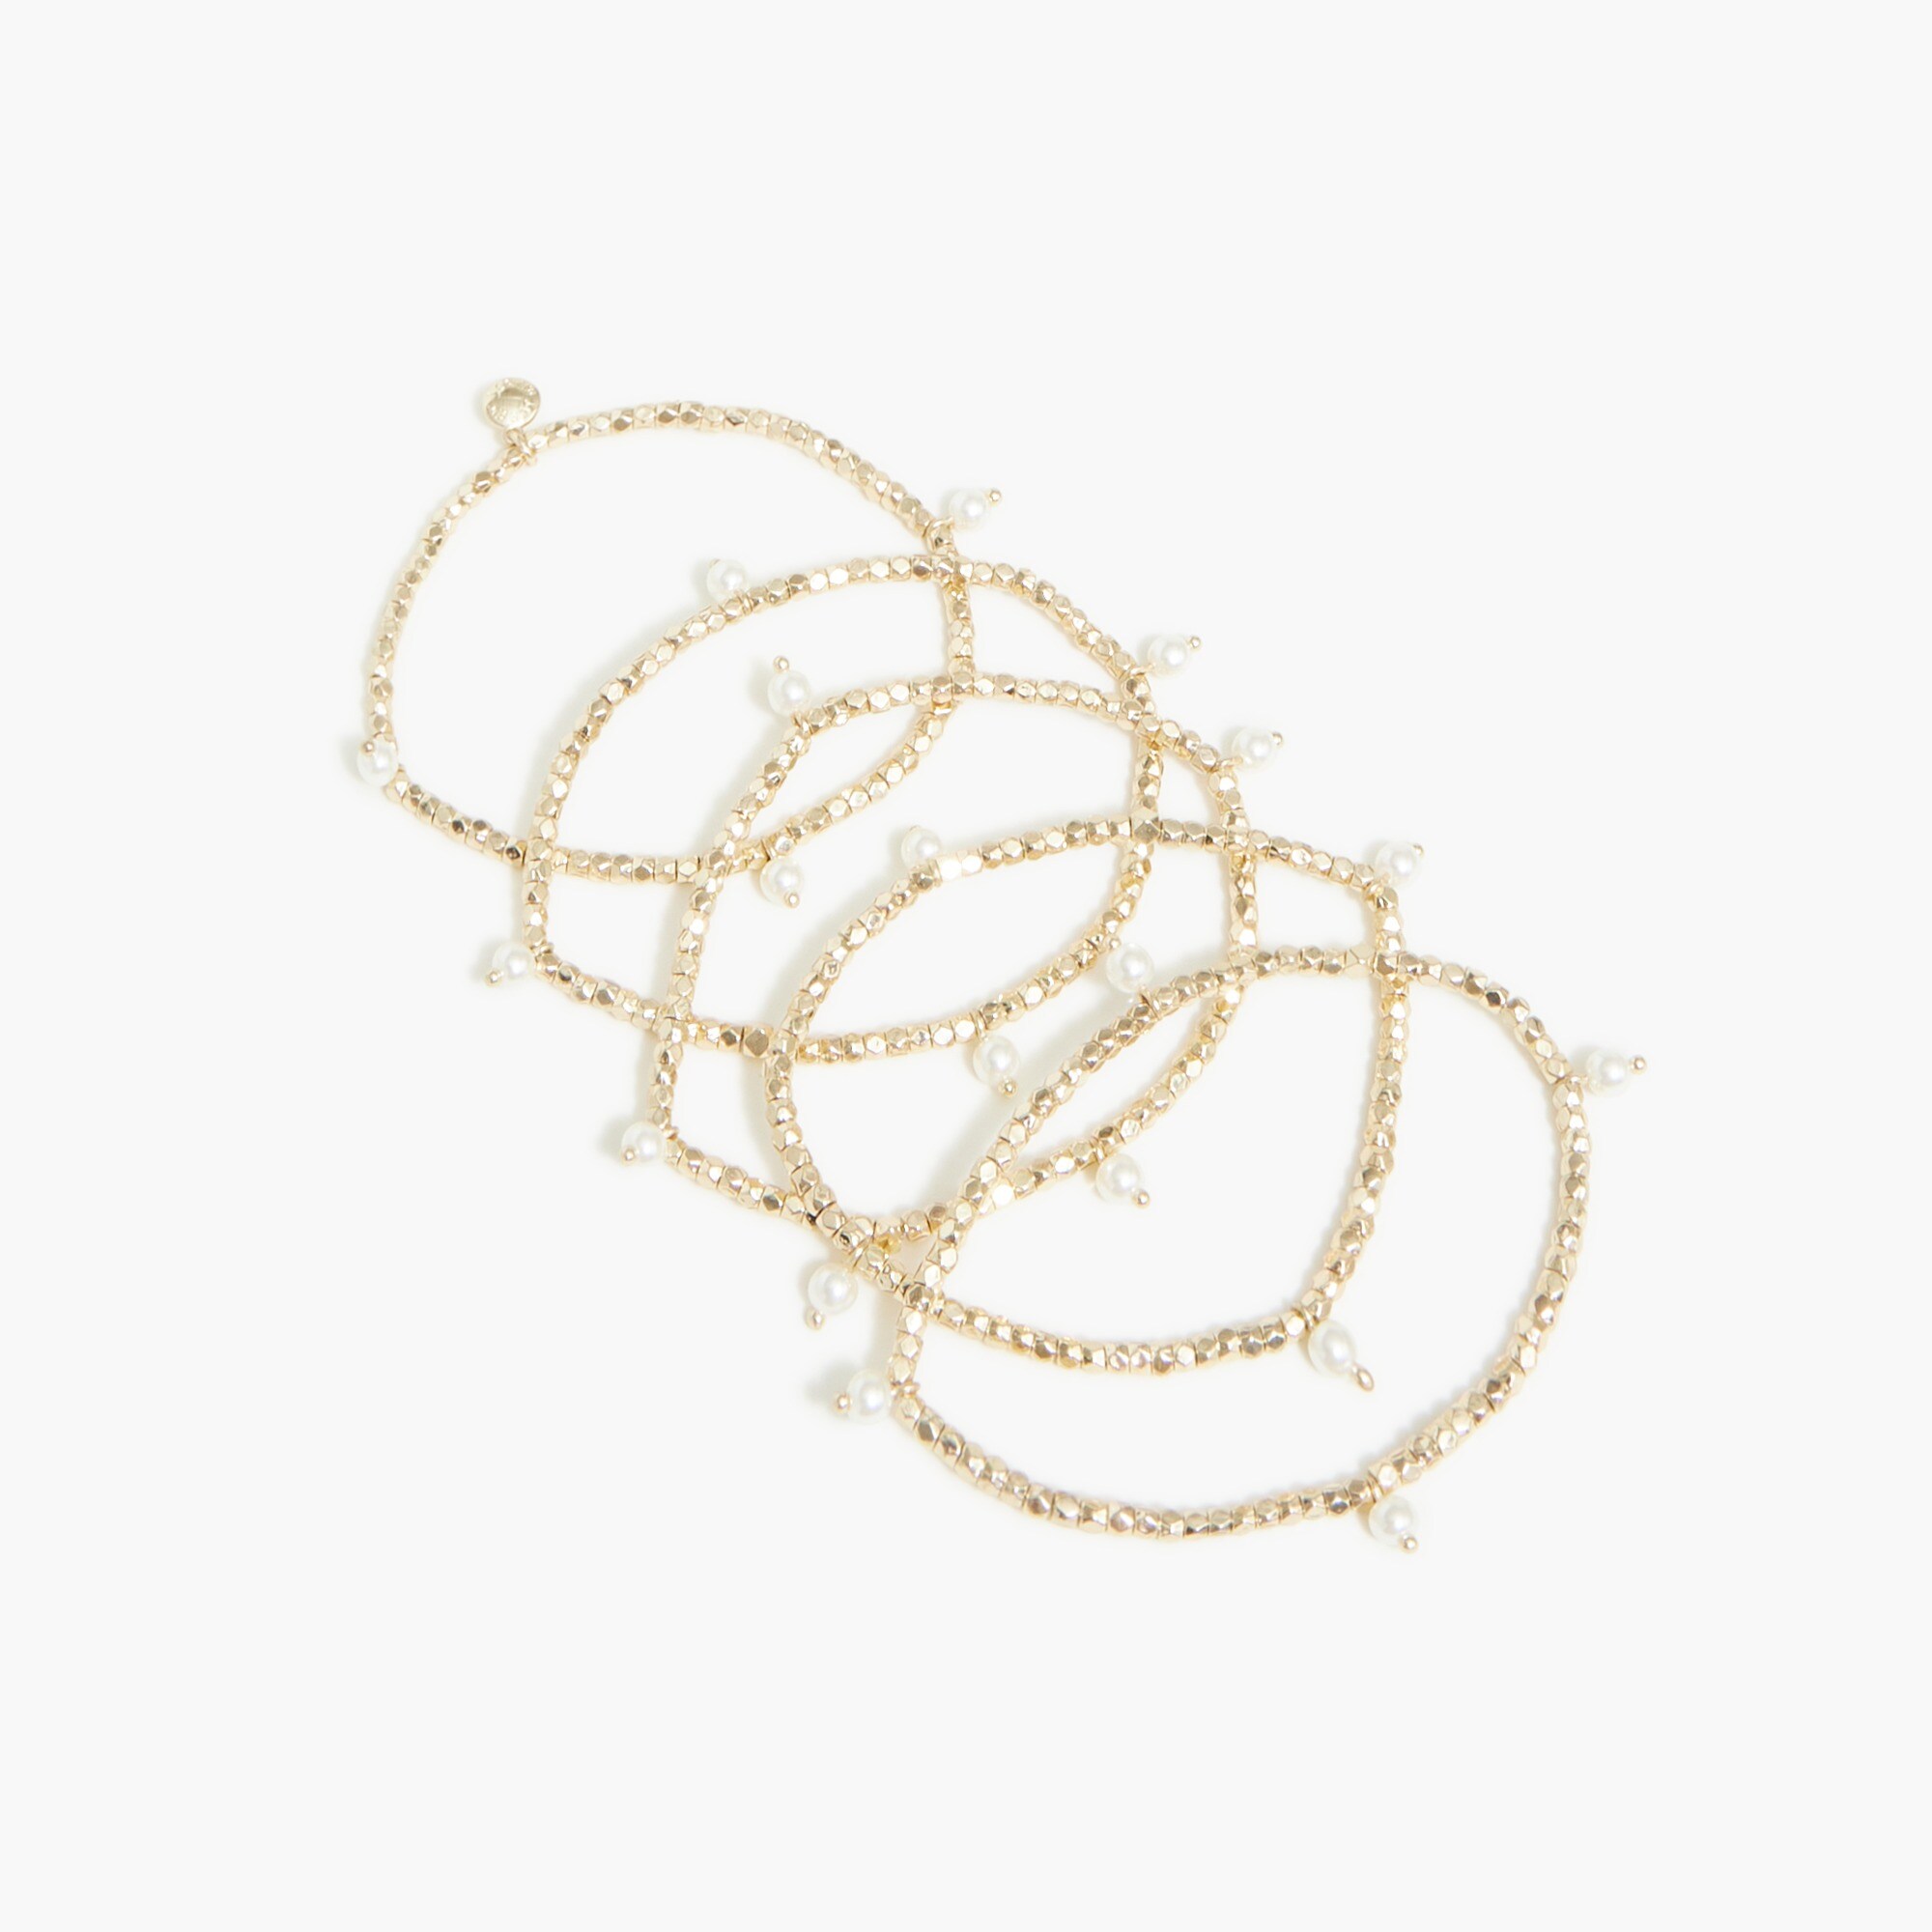  Gold and pearl stretch bracelets set-of-six